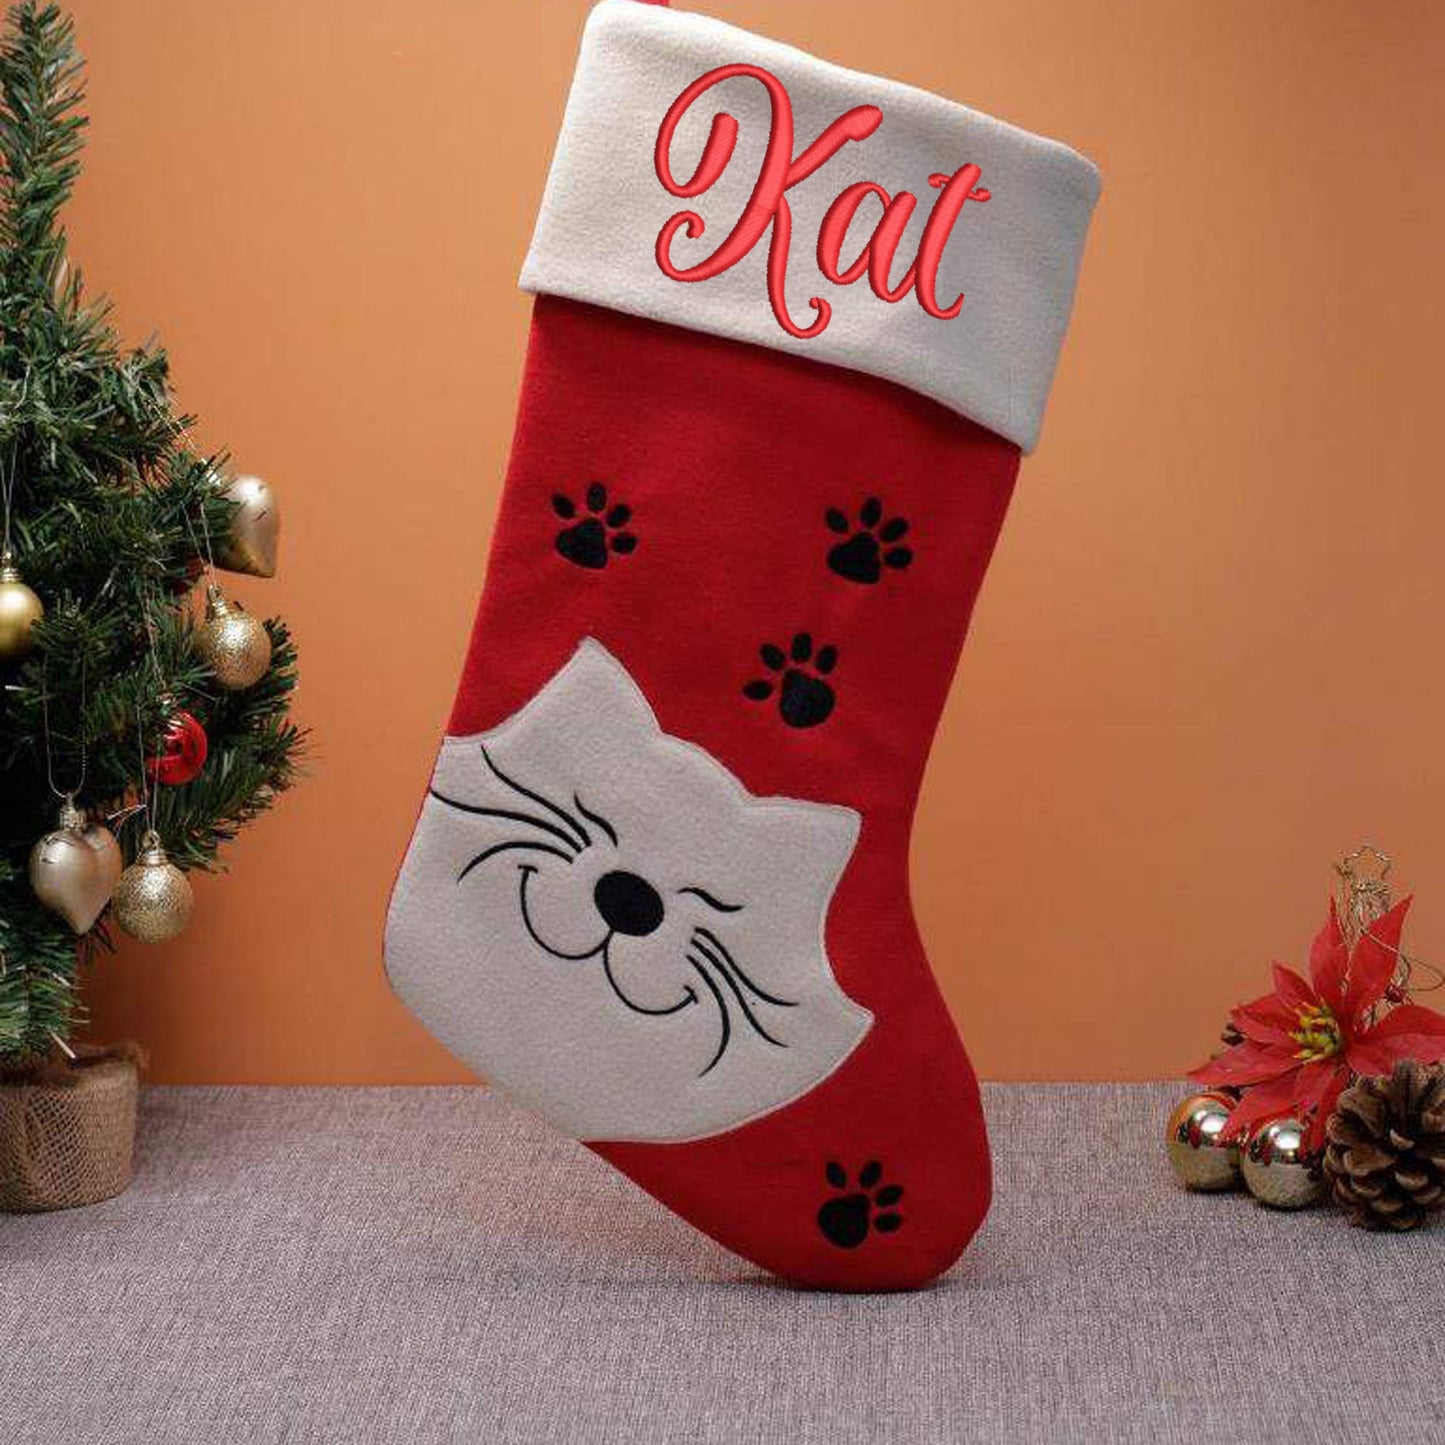 Personalised Embroidered Dog / Cat Christmas Stocking  - Always Looking Good - CAT STOCKING  